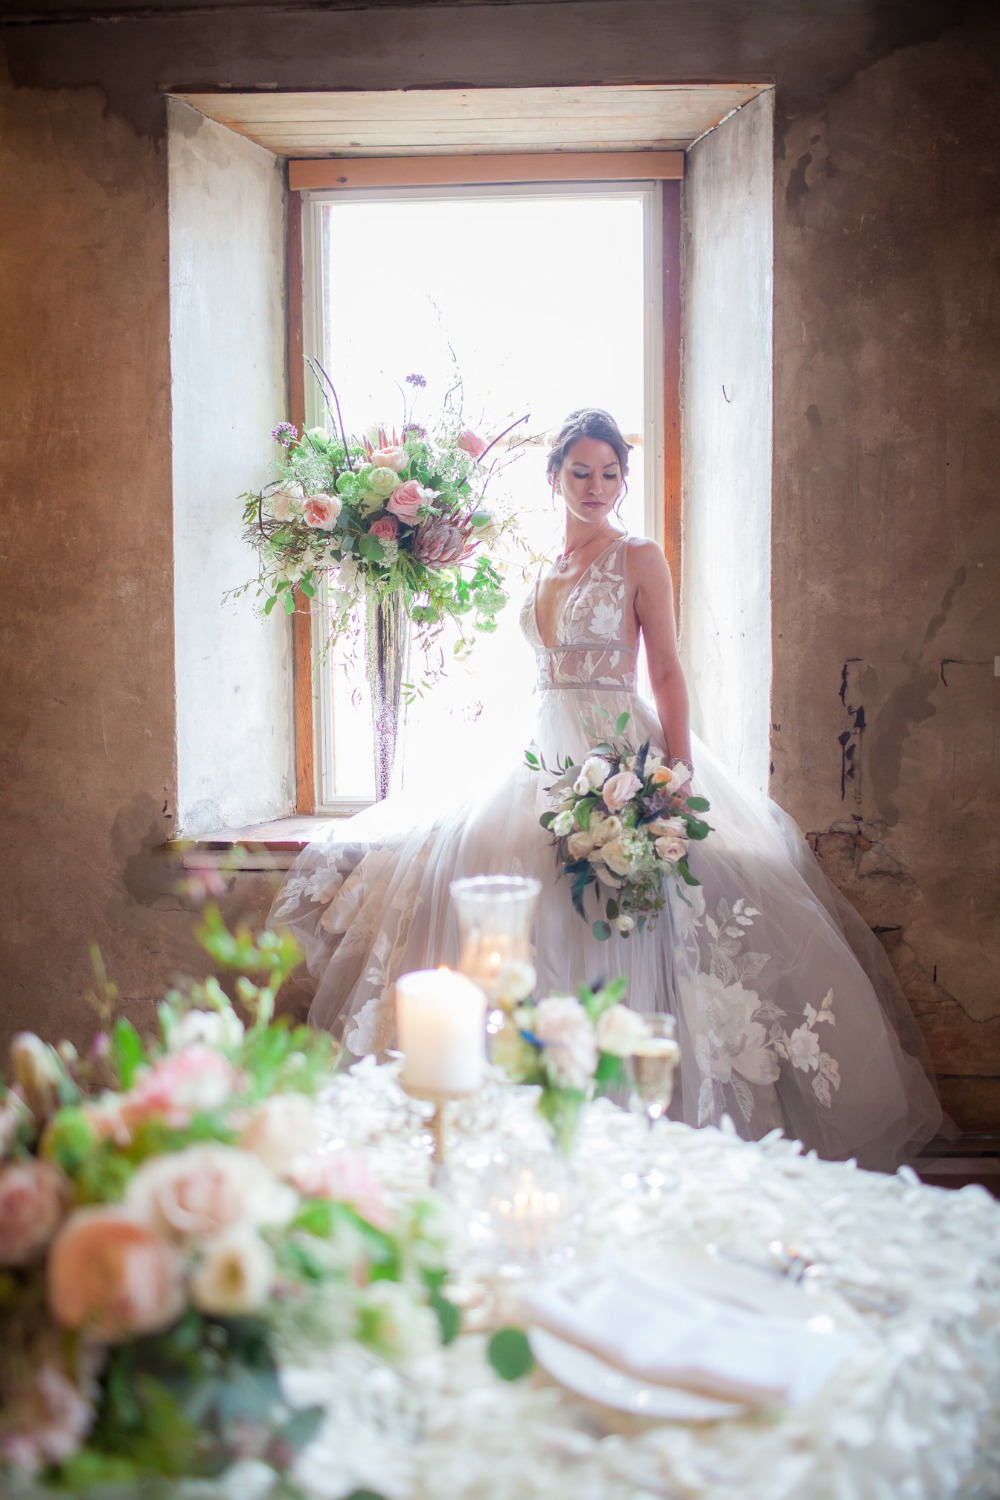 How To Have A Chic Fairytale Castle Style Wedding